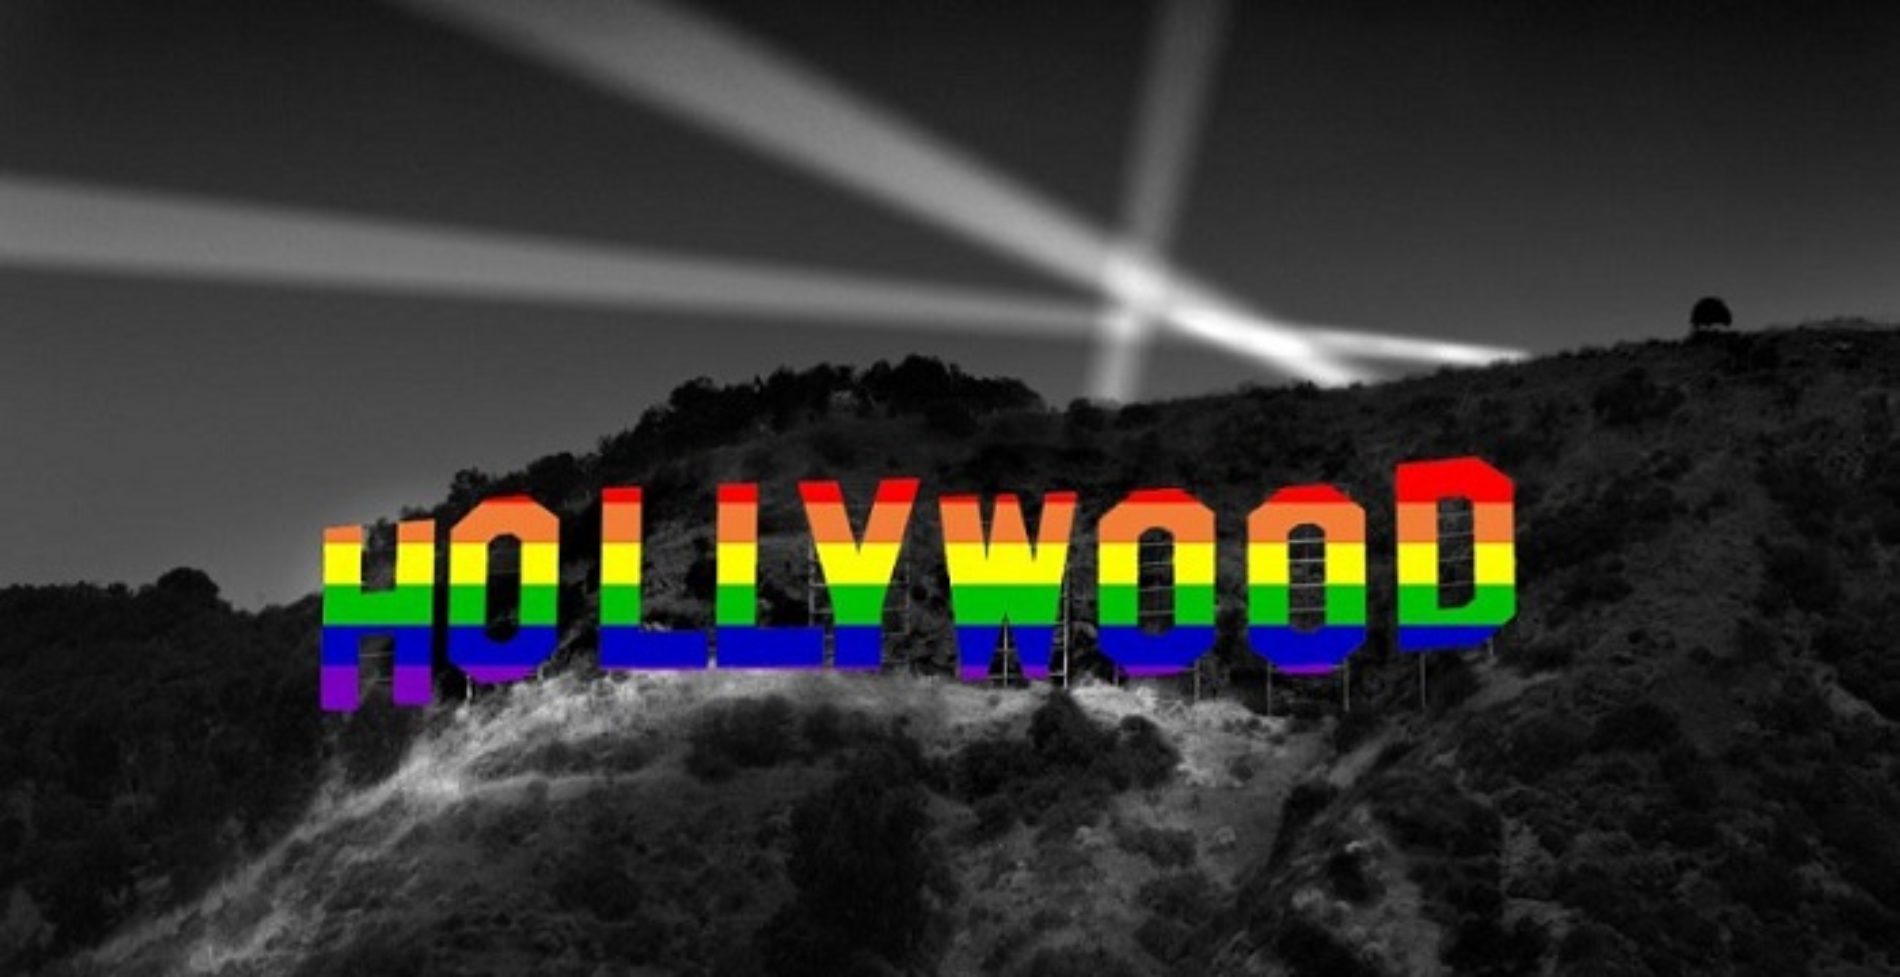 New GLAAD Video Highlights Homophobia In Hollywood